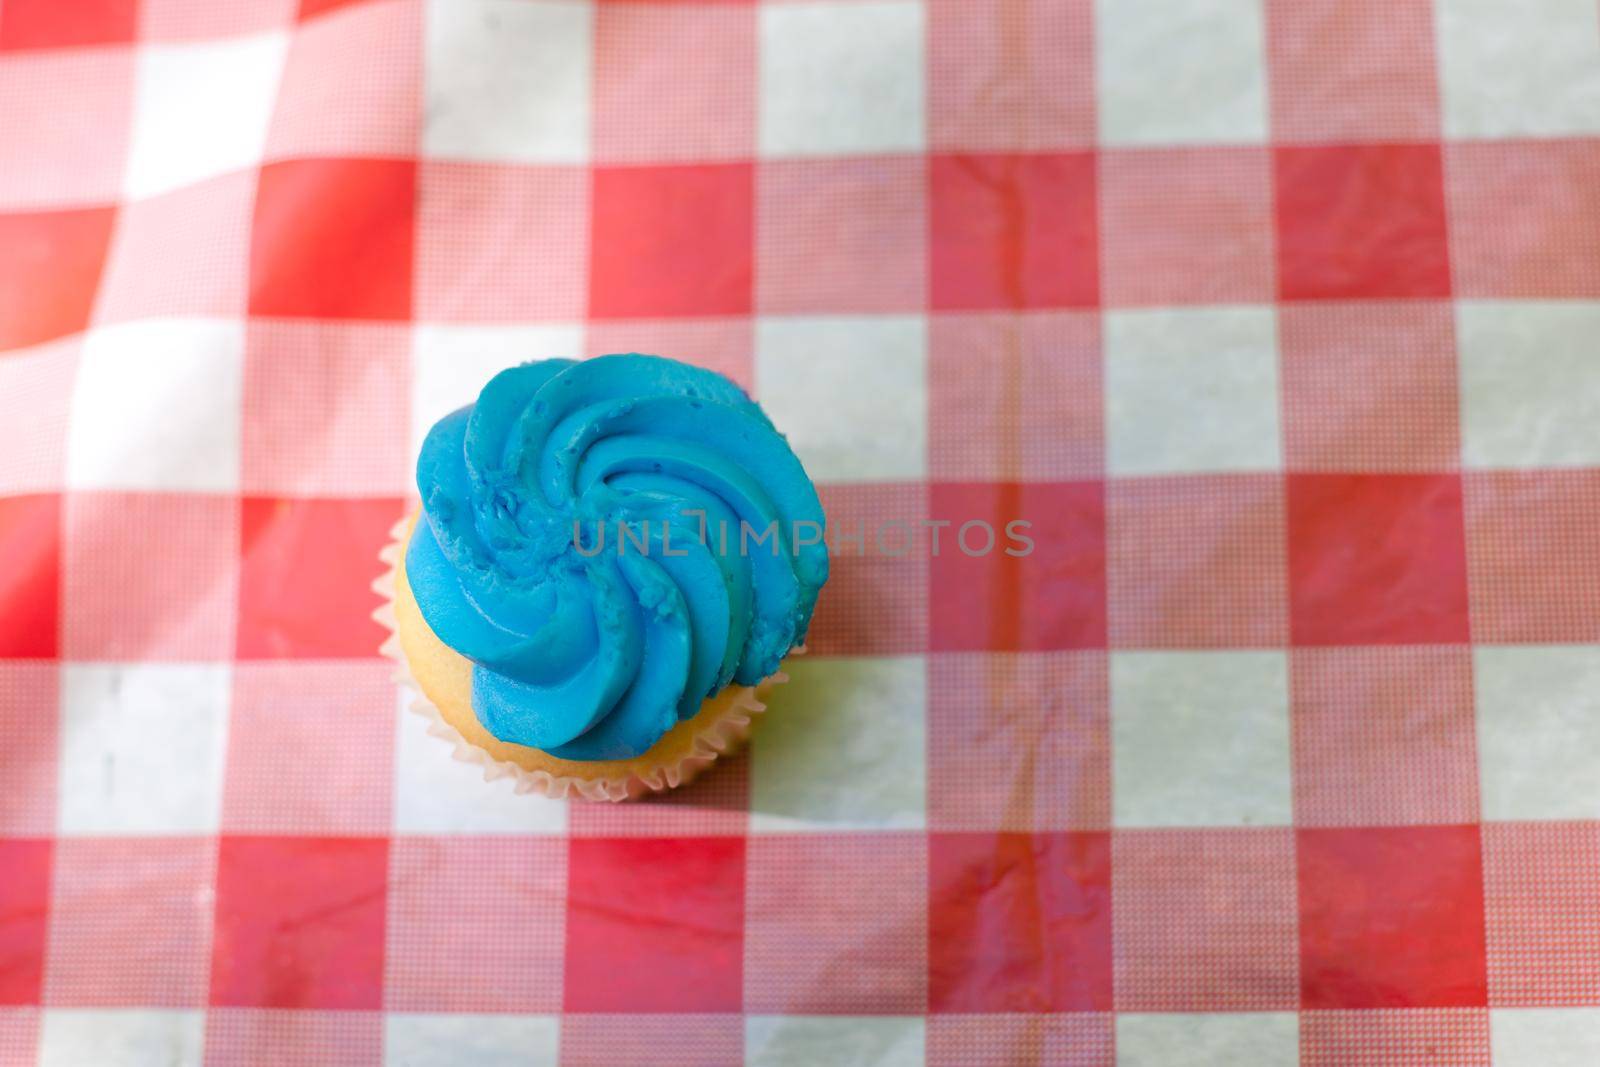  A small cupcake with blue icing ready to be eaten from a picnic table